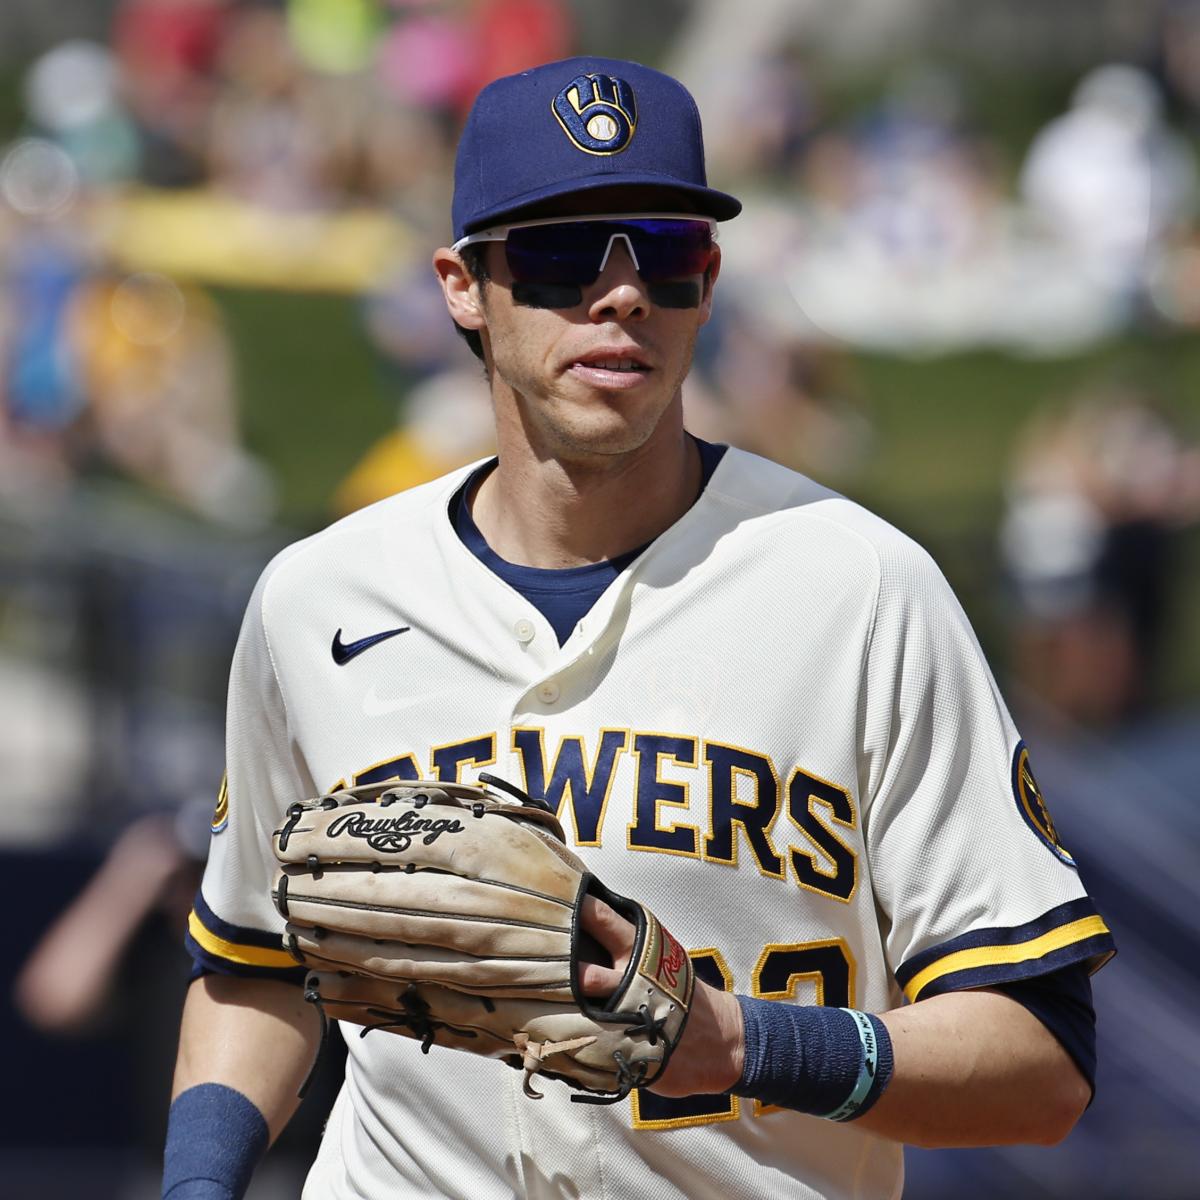 MaxPreps on X: Brewers superstar Christian Yelich sent a letter